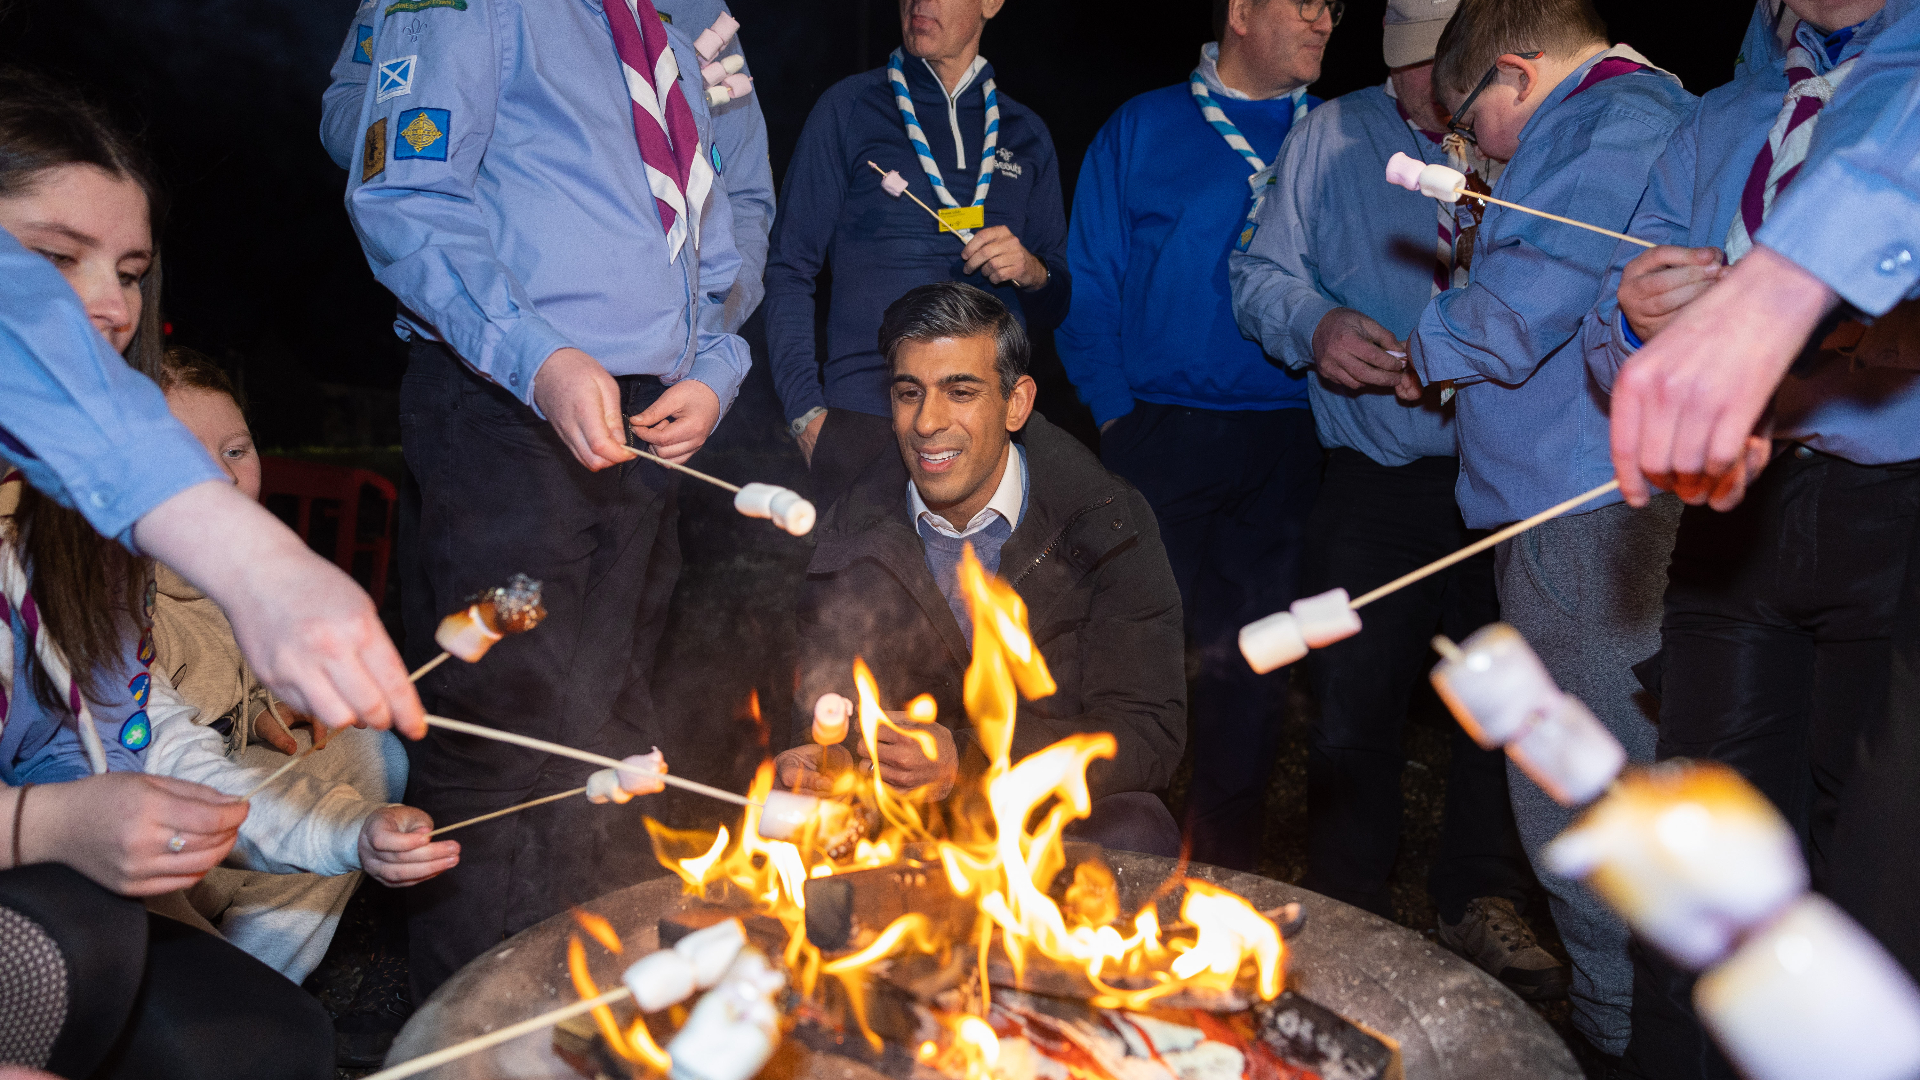 Prime Minister Rishi Sunak met a sea scout group in Inverness and toasted marshmallows with them over an open fire.